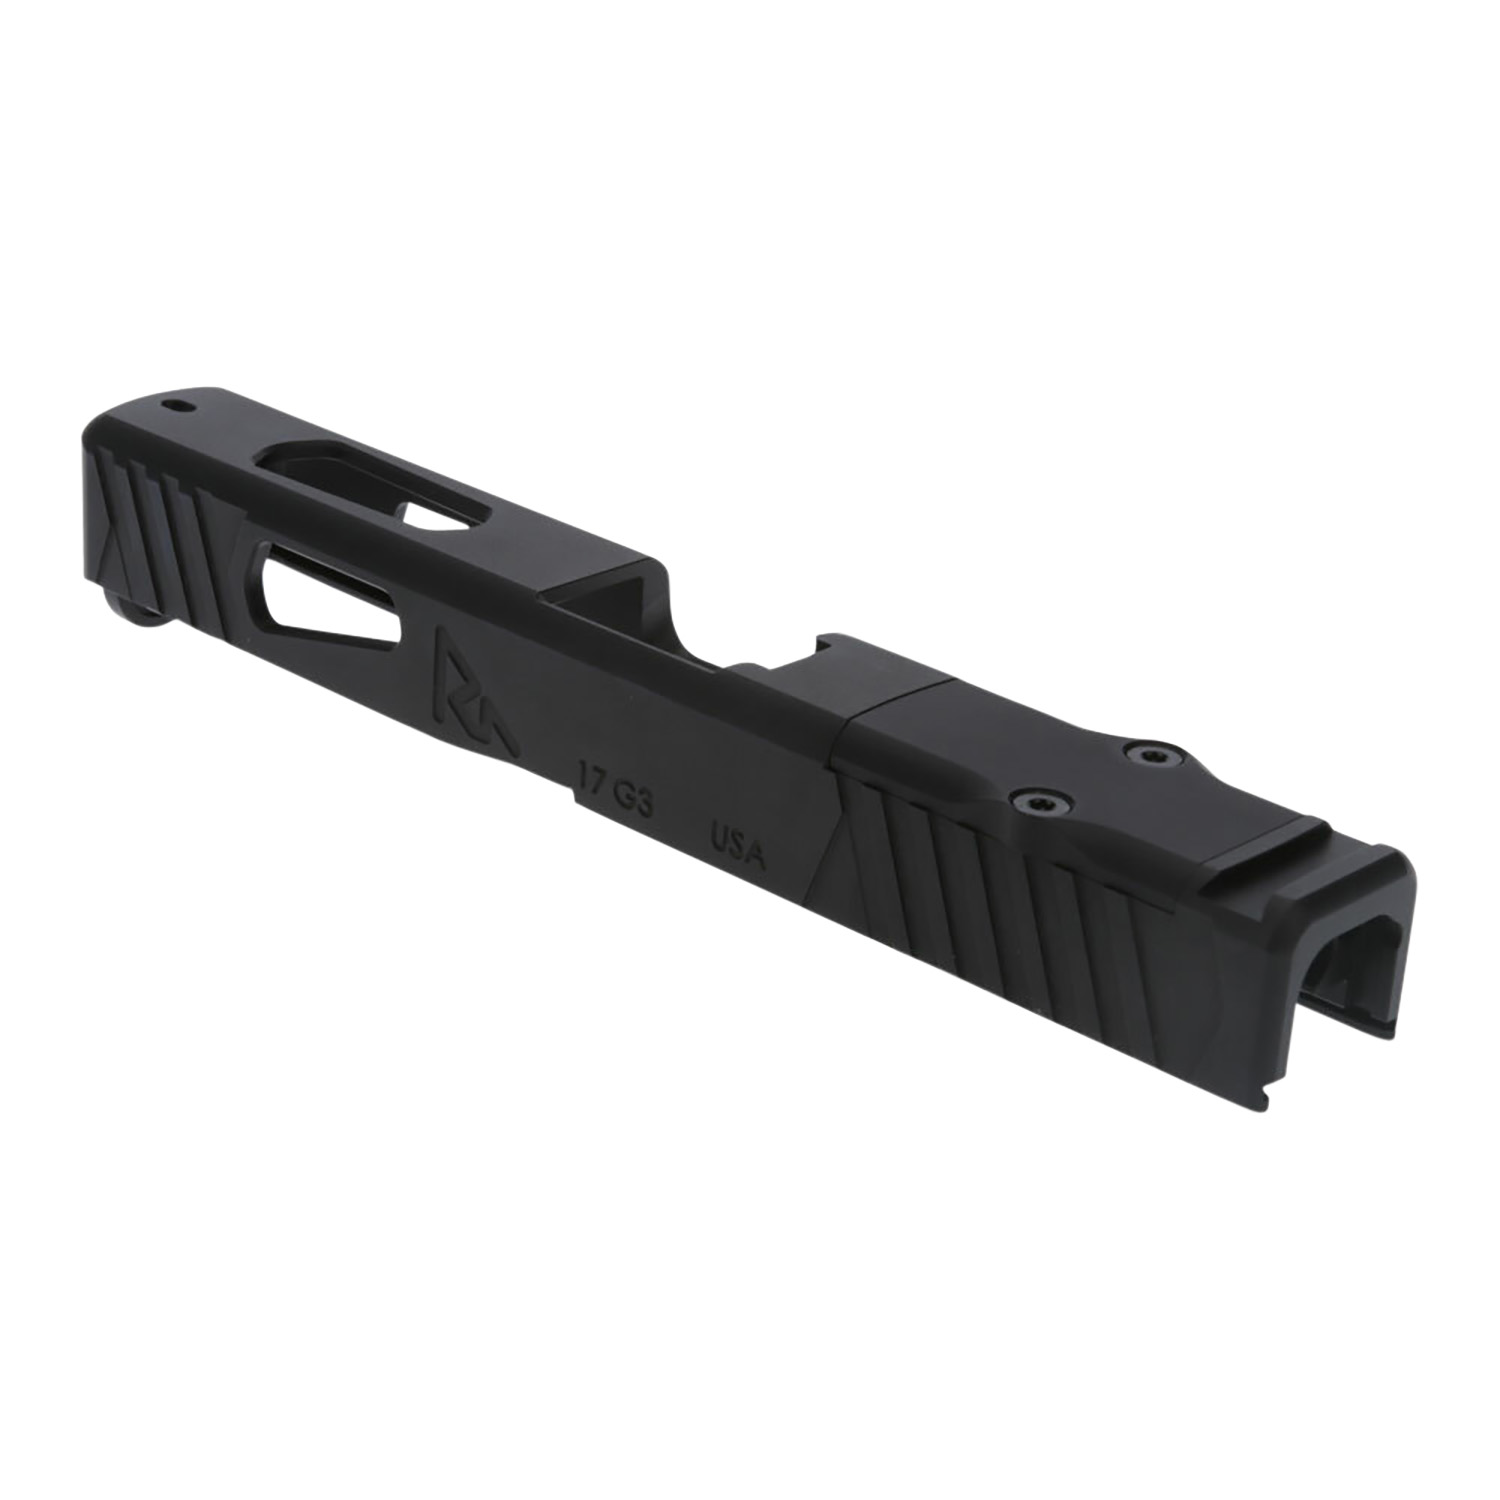 RIVAL ARMS SIG365 XL A1 RMS STRIPPED SLIDE BLACK